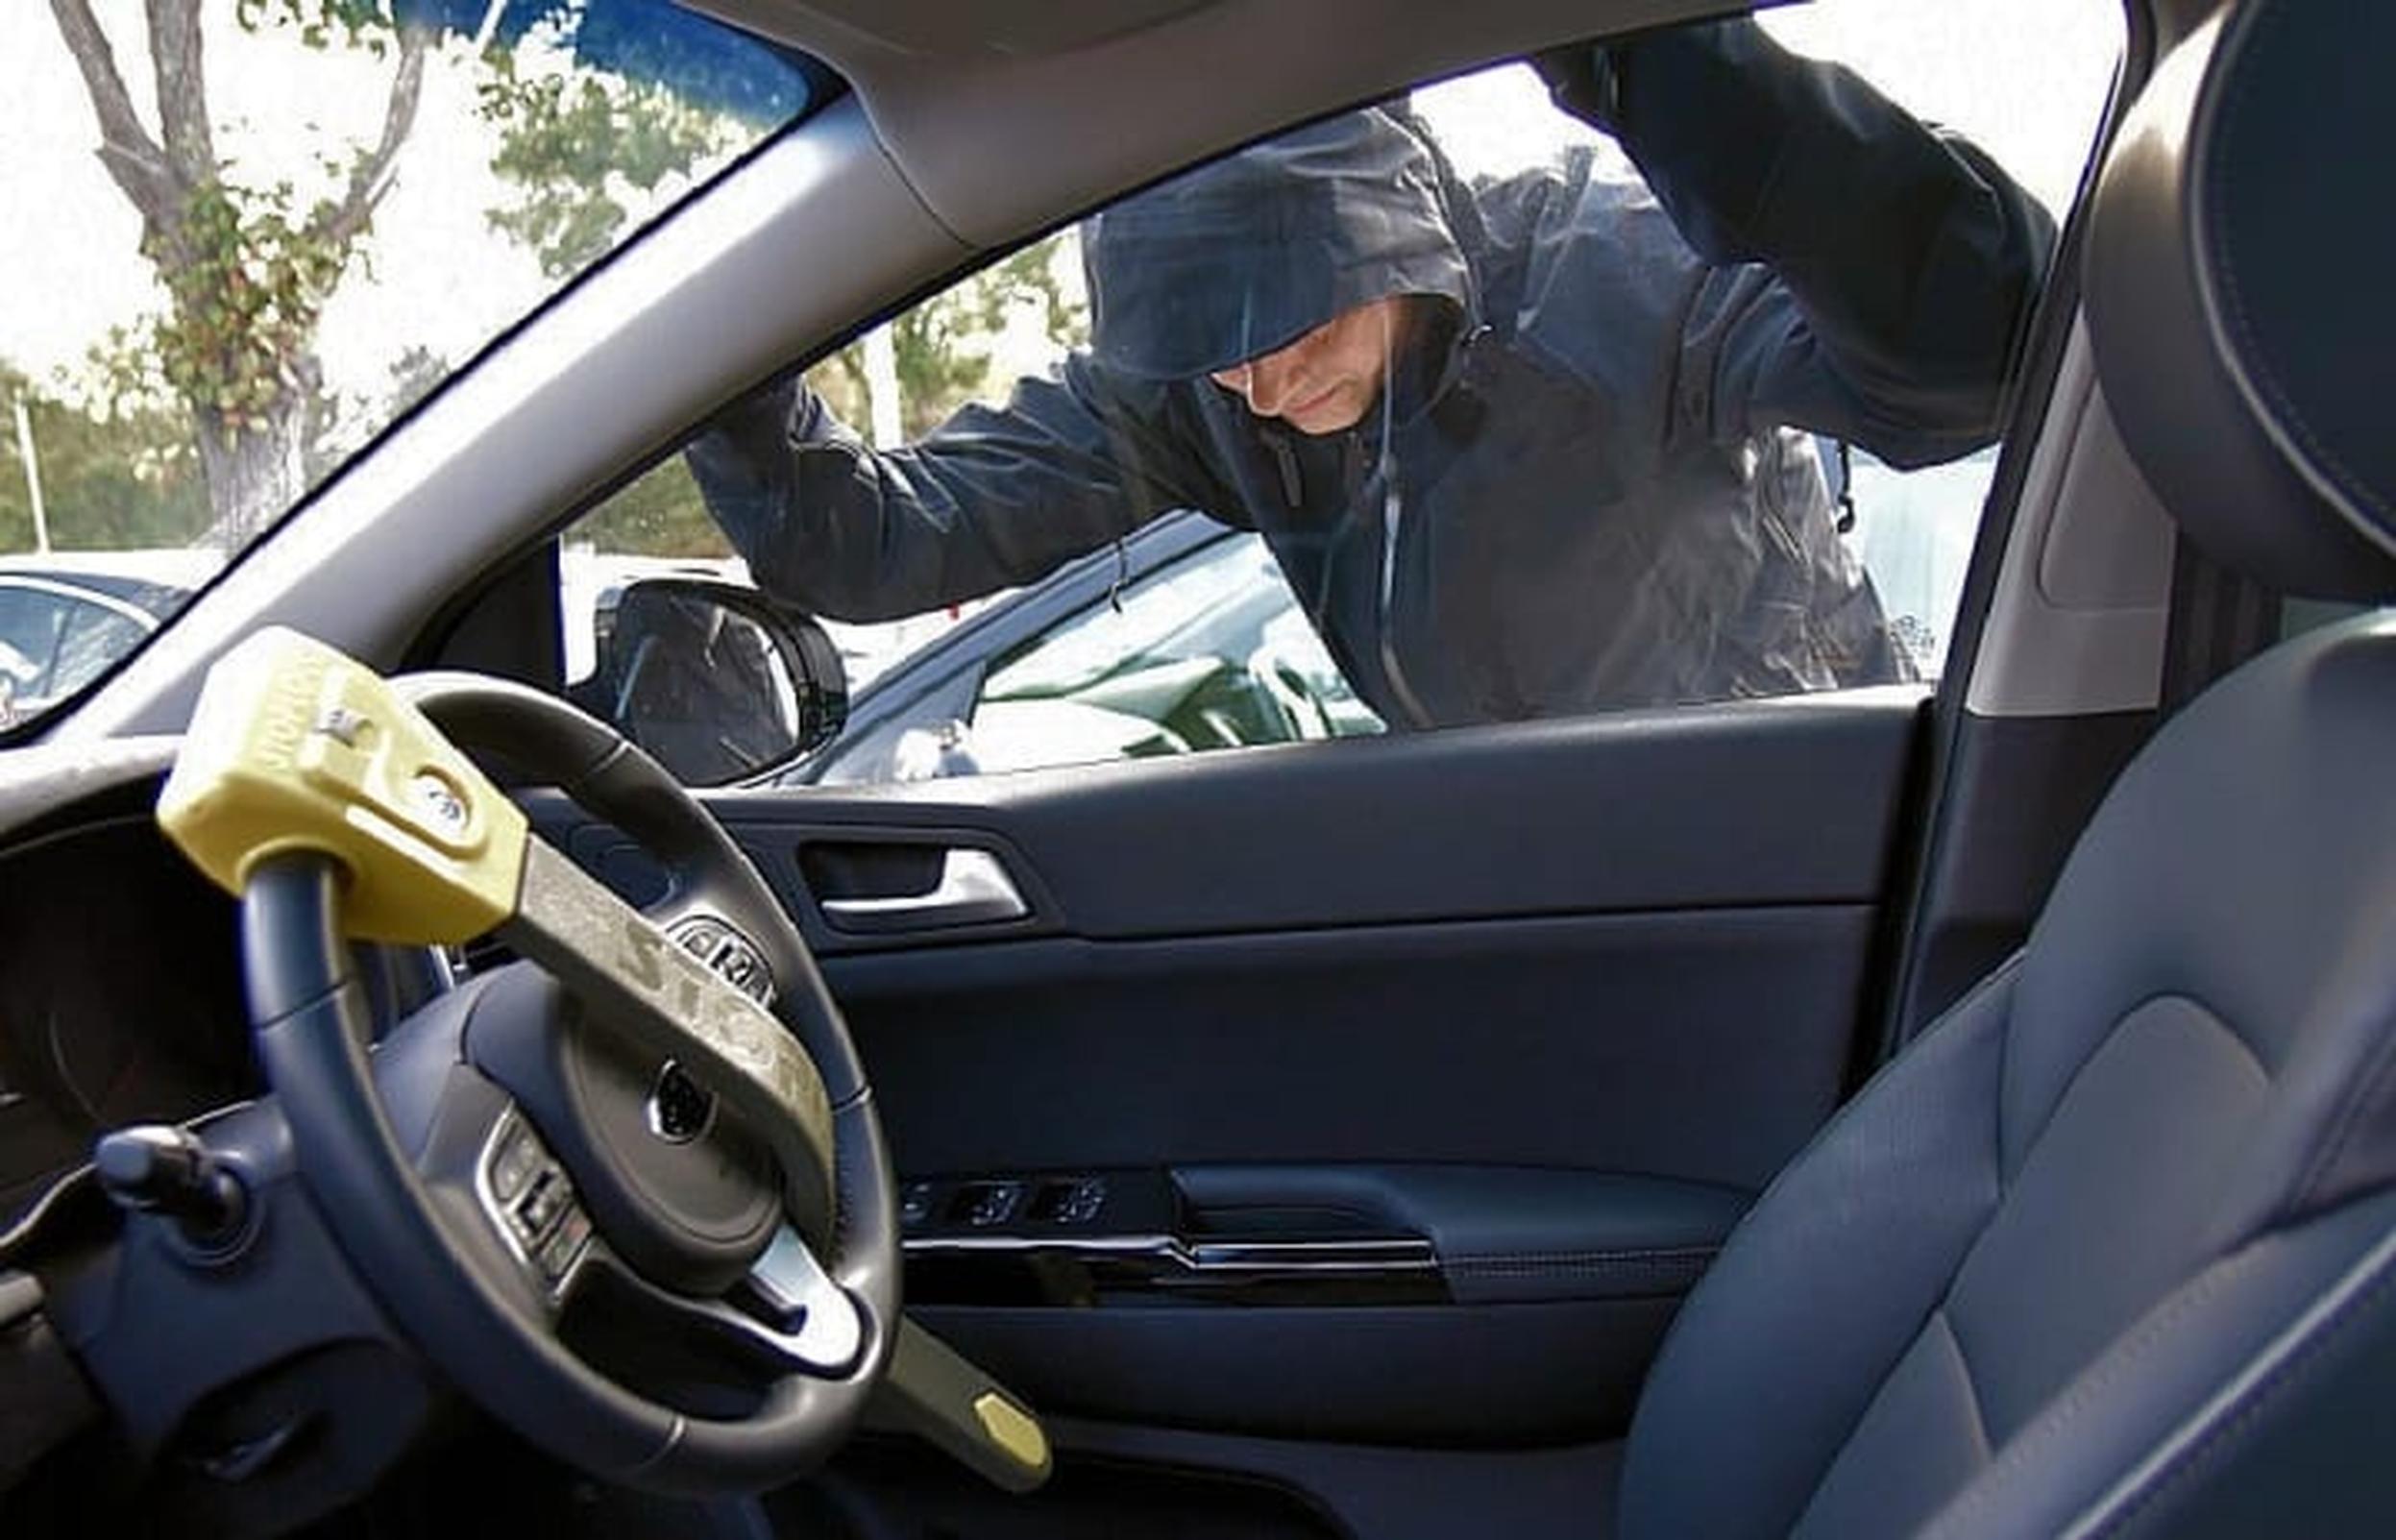 A total of 239,920 vehicle break-ins were reported to 42 police forces in 2016